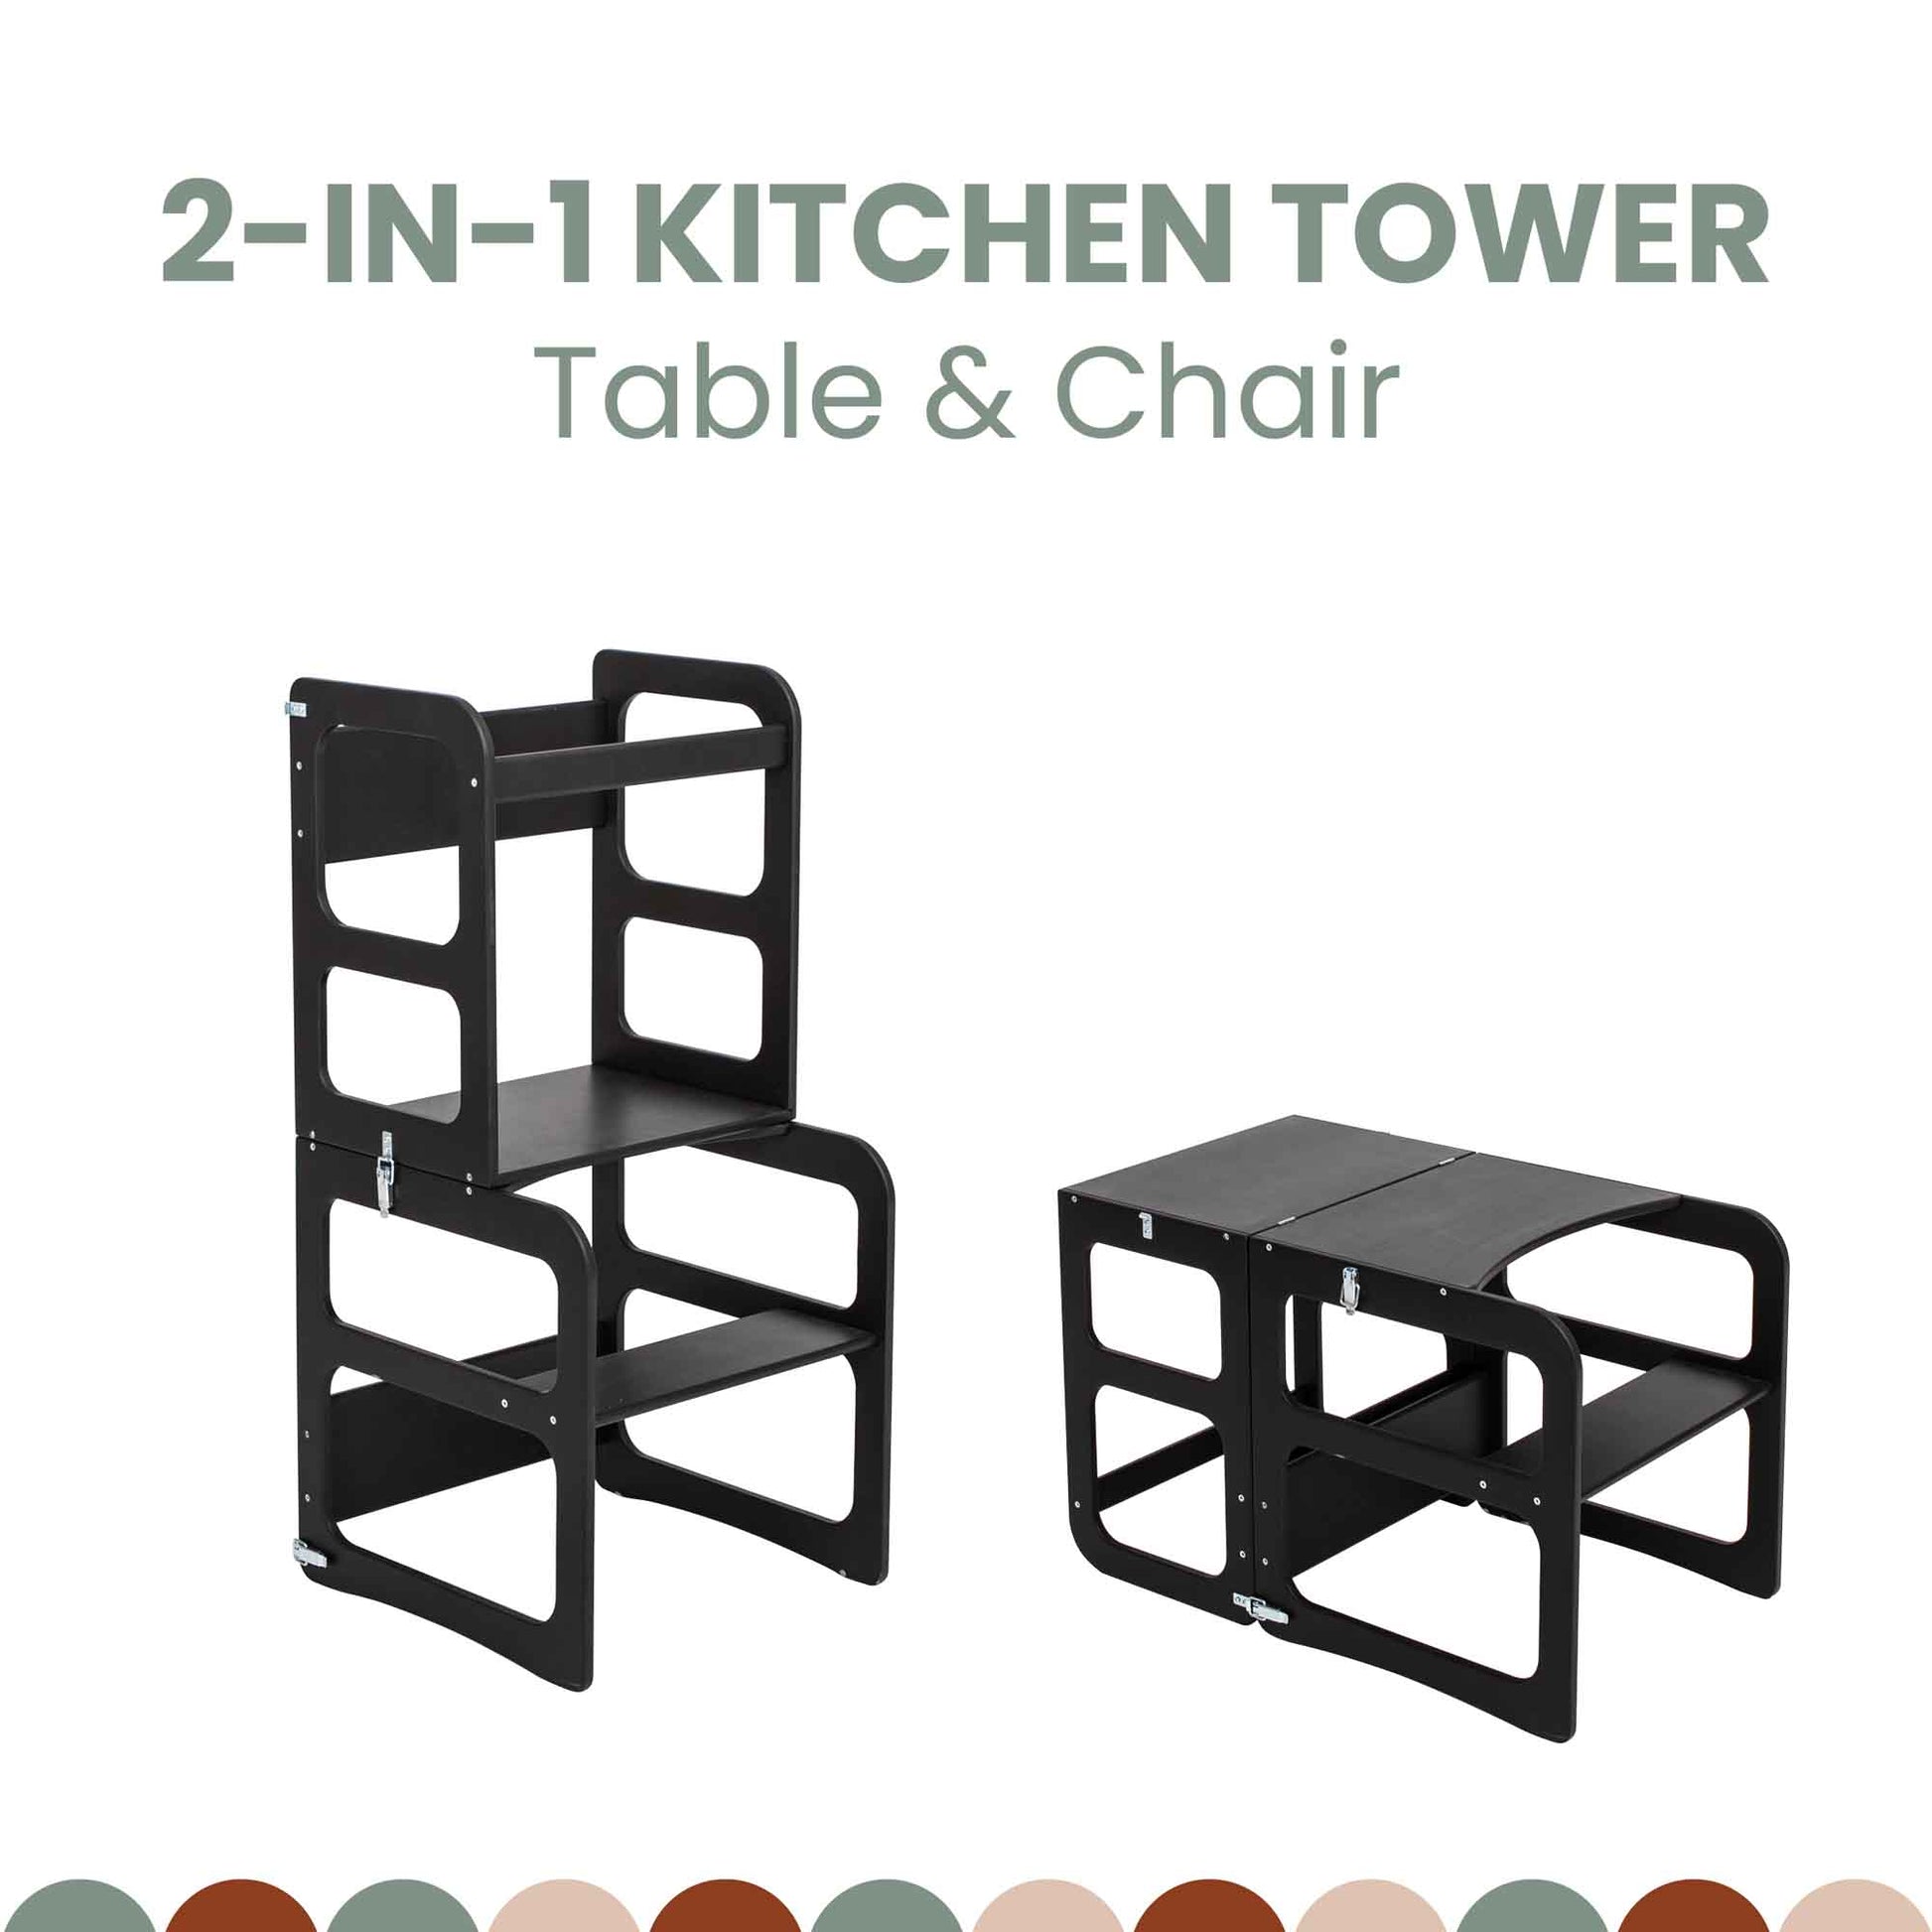 The 2-in-1 Transformable Kitchen Tower - Table and Chair Set is perfect for the young chef. This Montessori helper tower effortlessly converts into a small table and chair set, showcased here in sleek black.